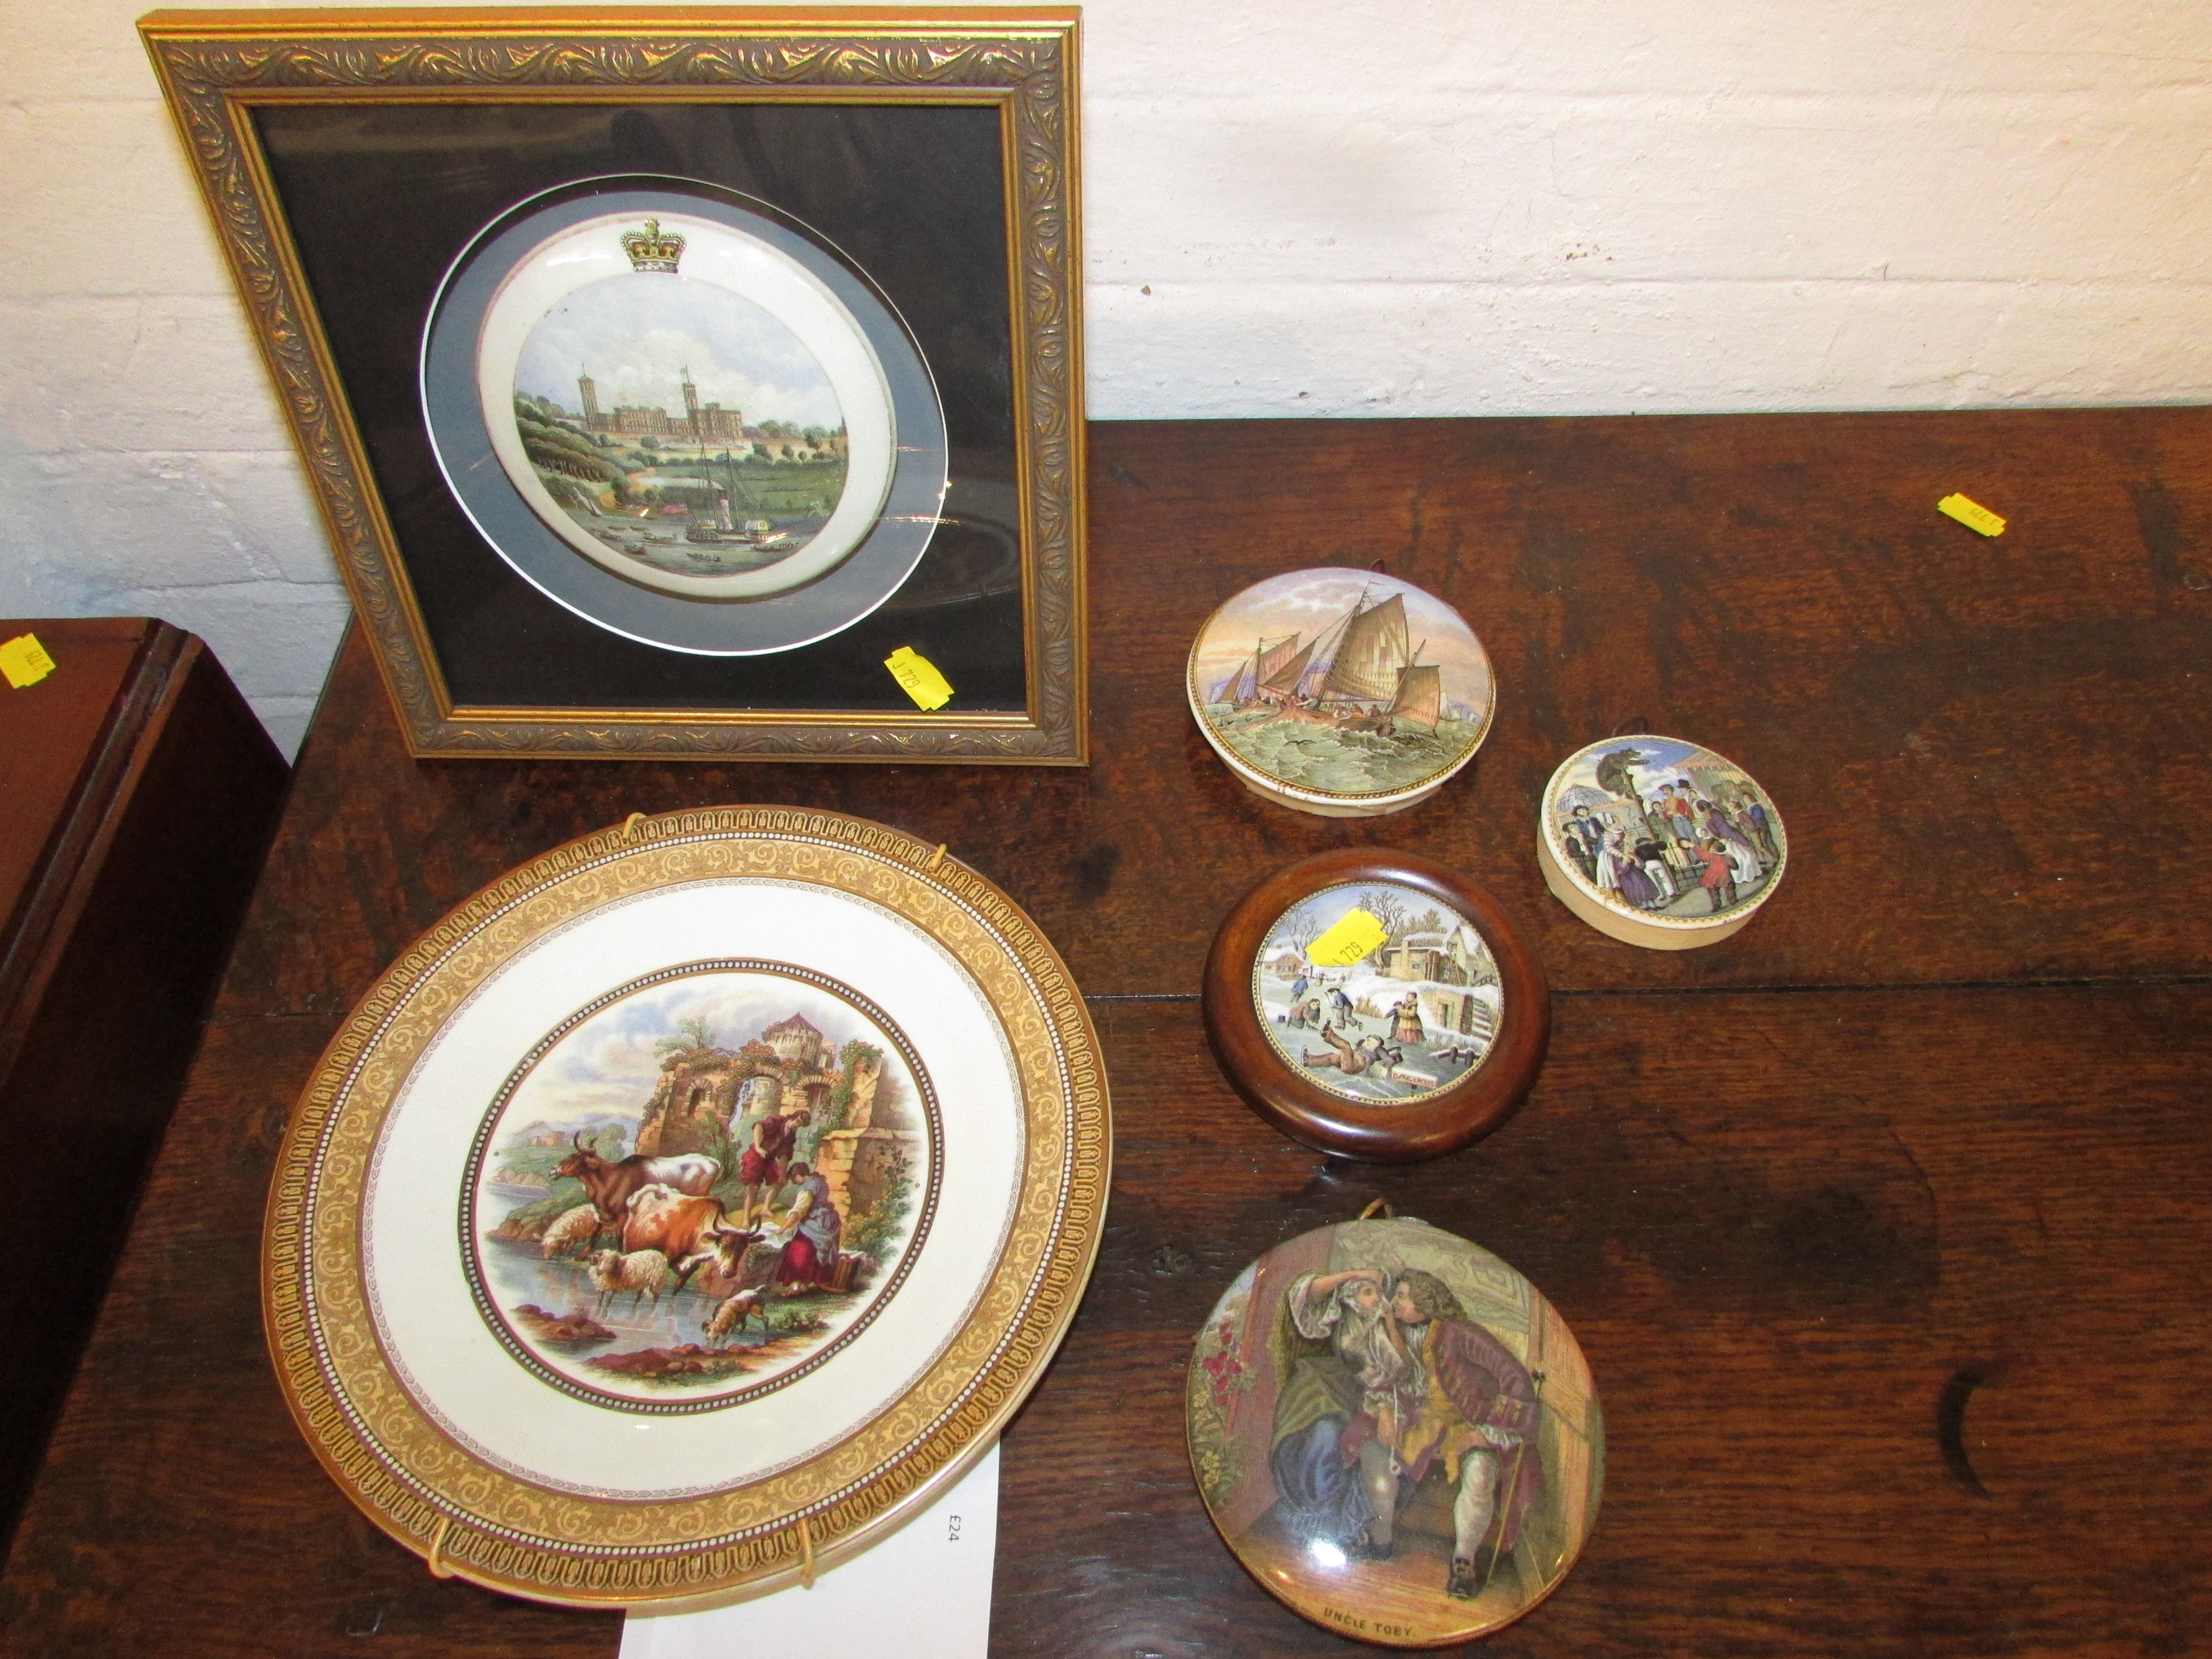 A Pratt pot lid showing Royal Palace with paddle steamer to foreground with crown to the rim set